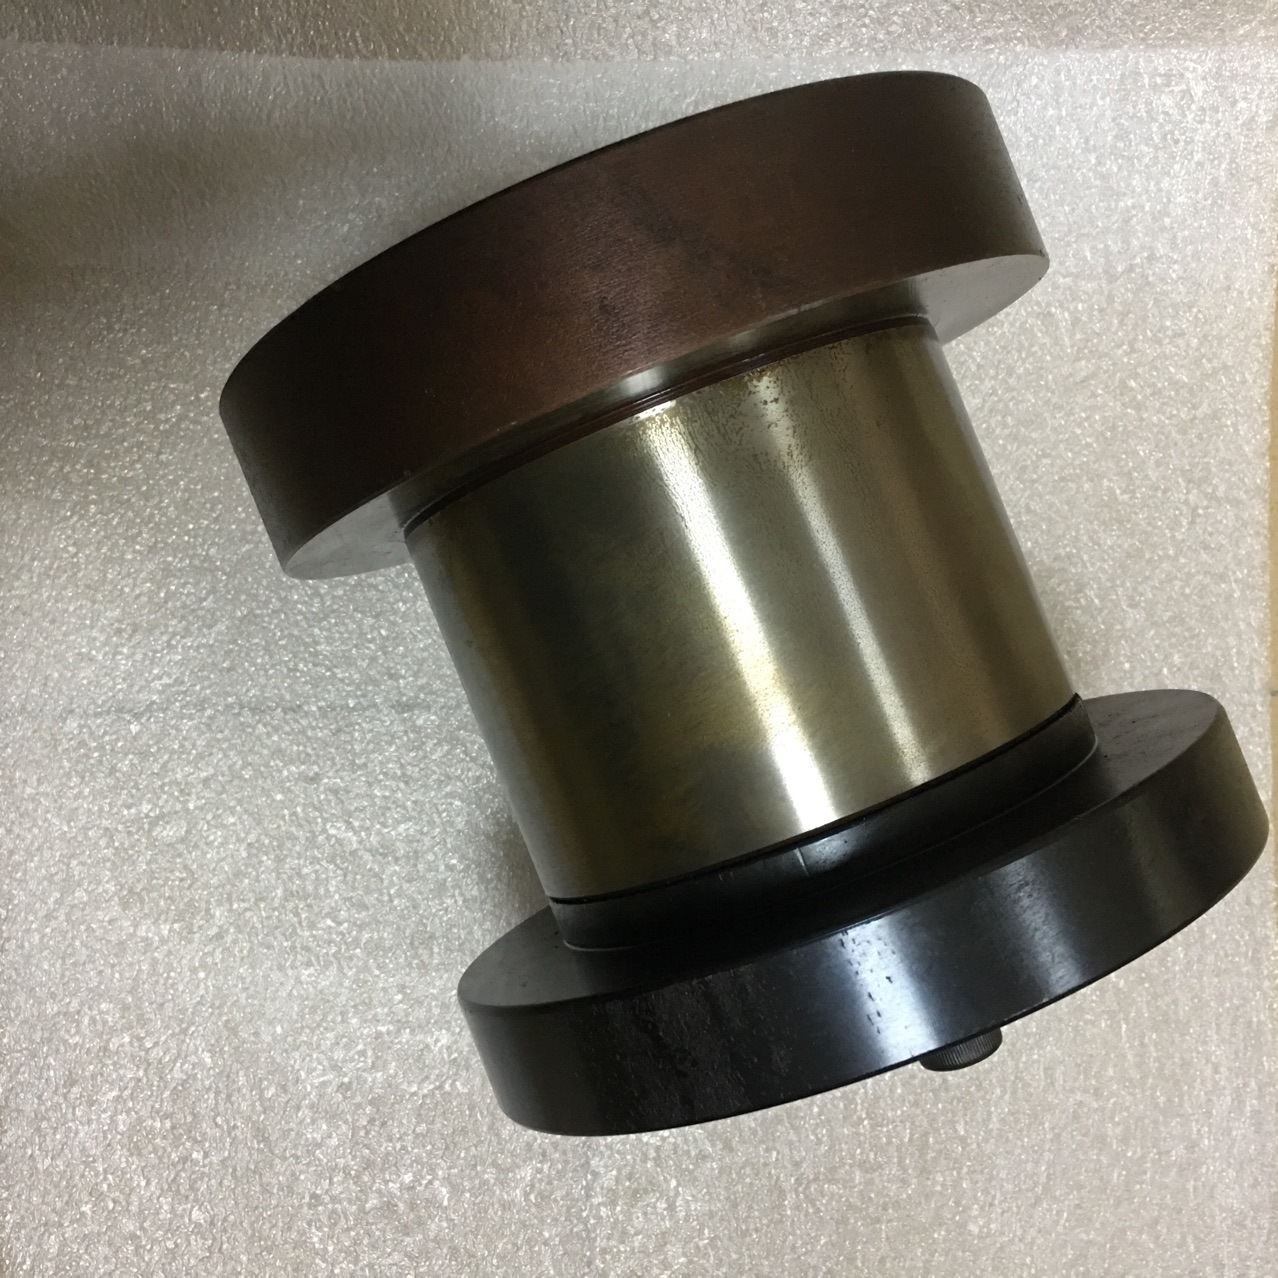 goods in stock supply Imported Taiwan Centerless Grinding machine grinding wheel Guide wheel flange 12 machine 18 Cheng Rong Guang,Key and equal grinding machine